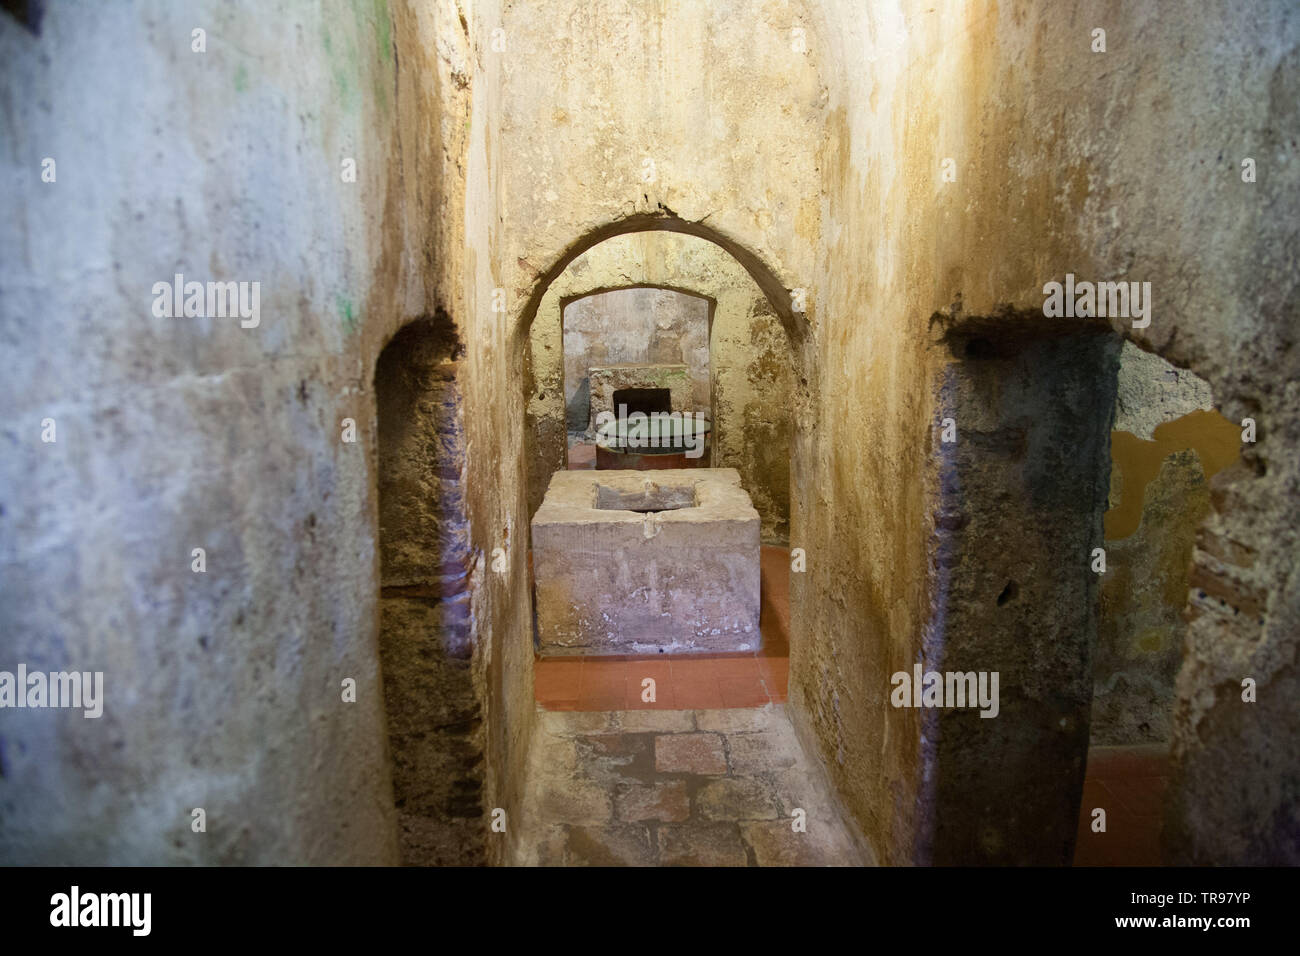 Underground chambers of the 4th/5th century hypogeum under the church of san salvatore in Sinis, Sardinia with altar in the background Stock Photo